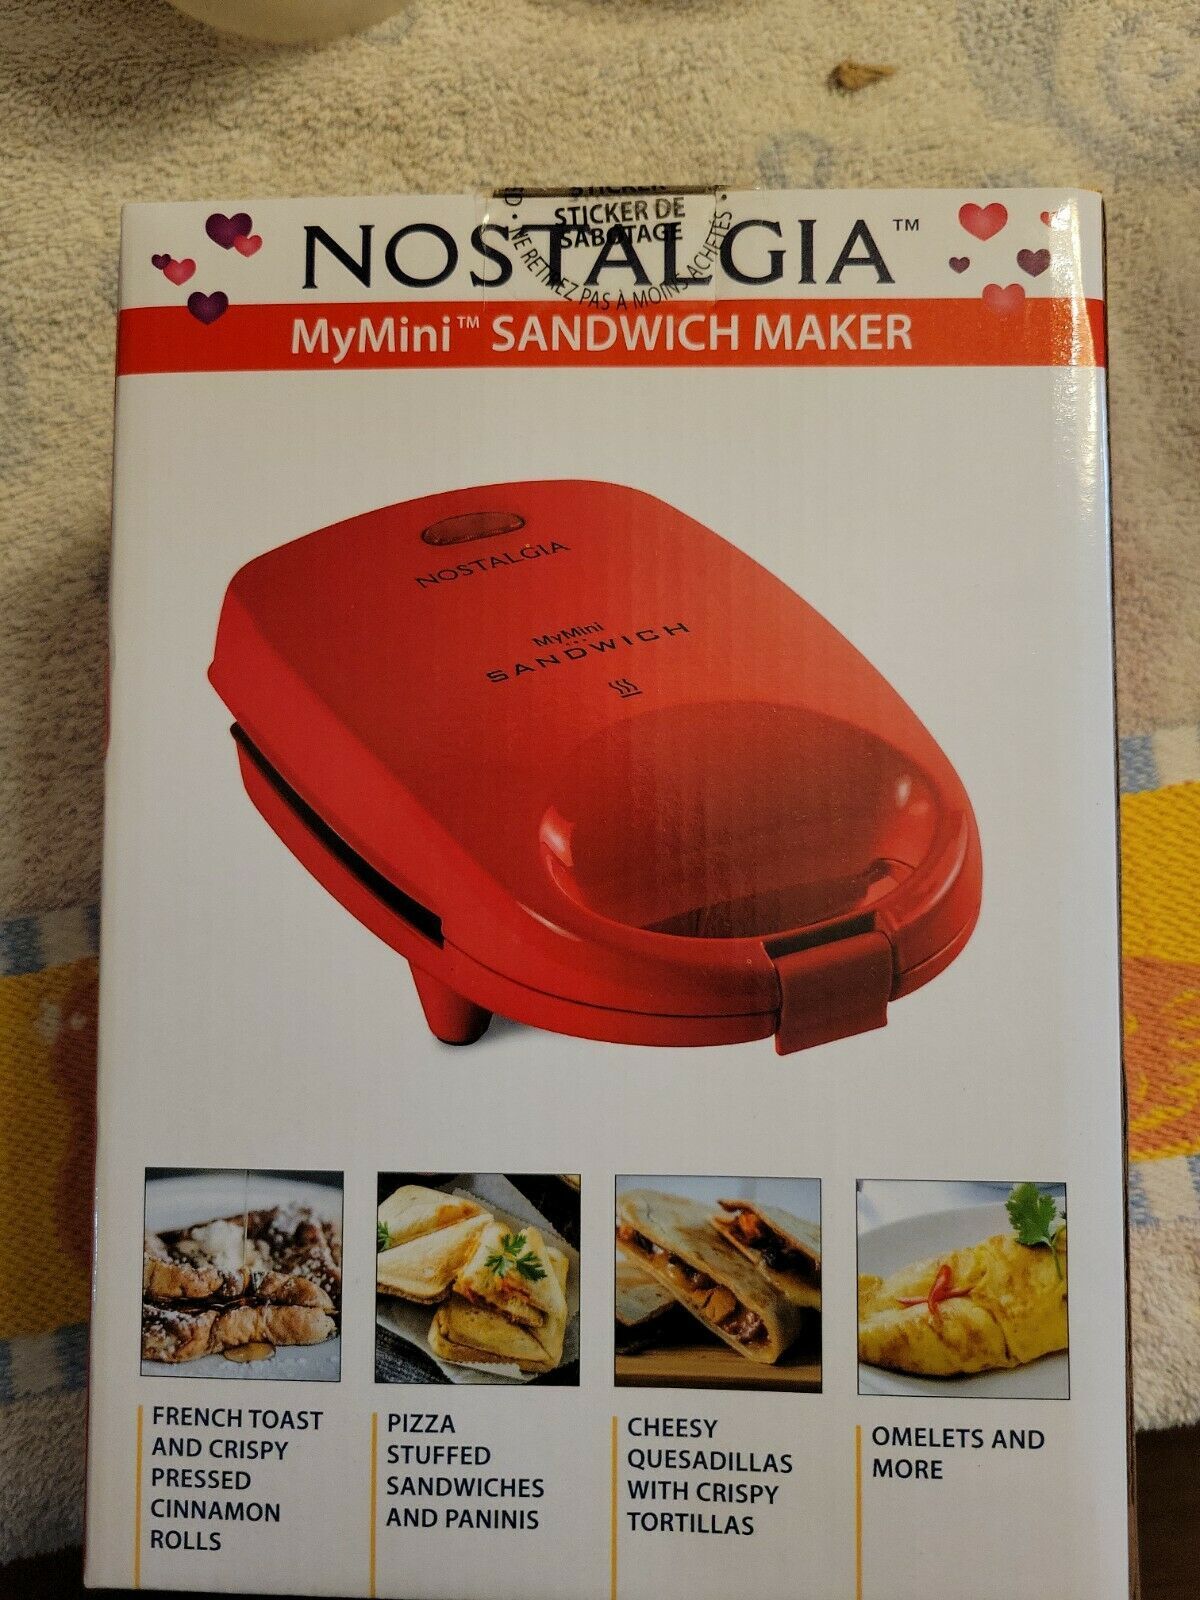 Nostalgia-My Mini Sandwich Maker- Compact, Easy To Clean, Nonstick, Red - $16.99